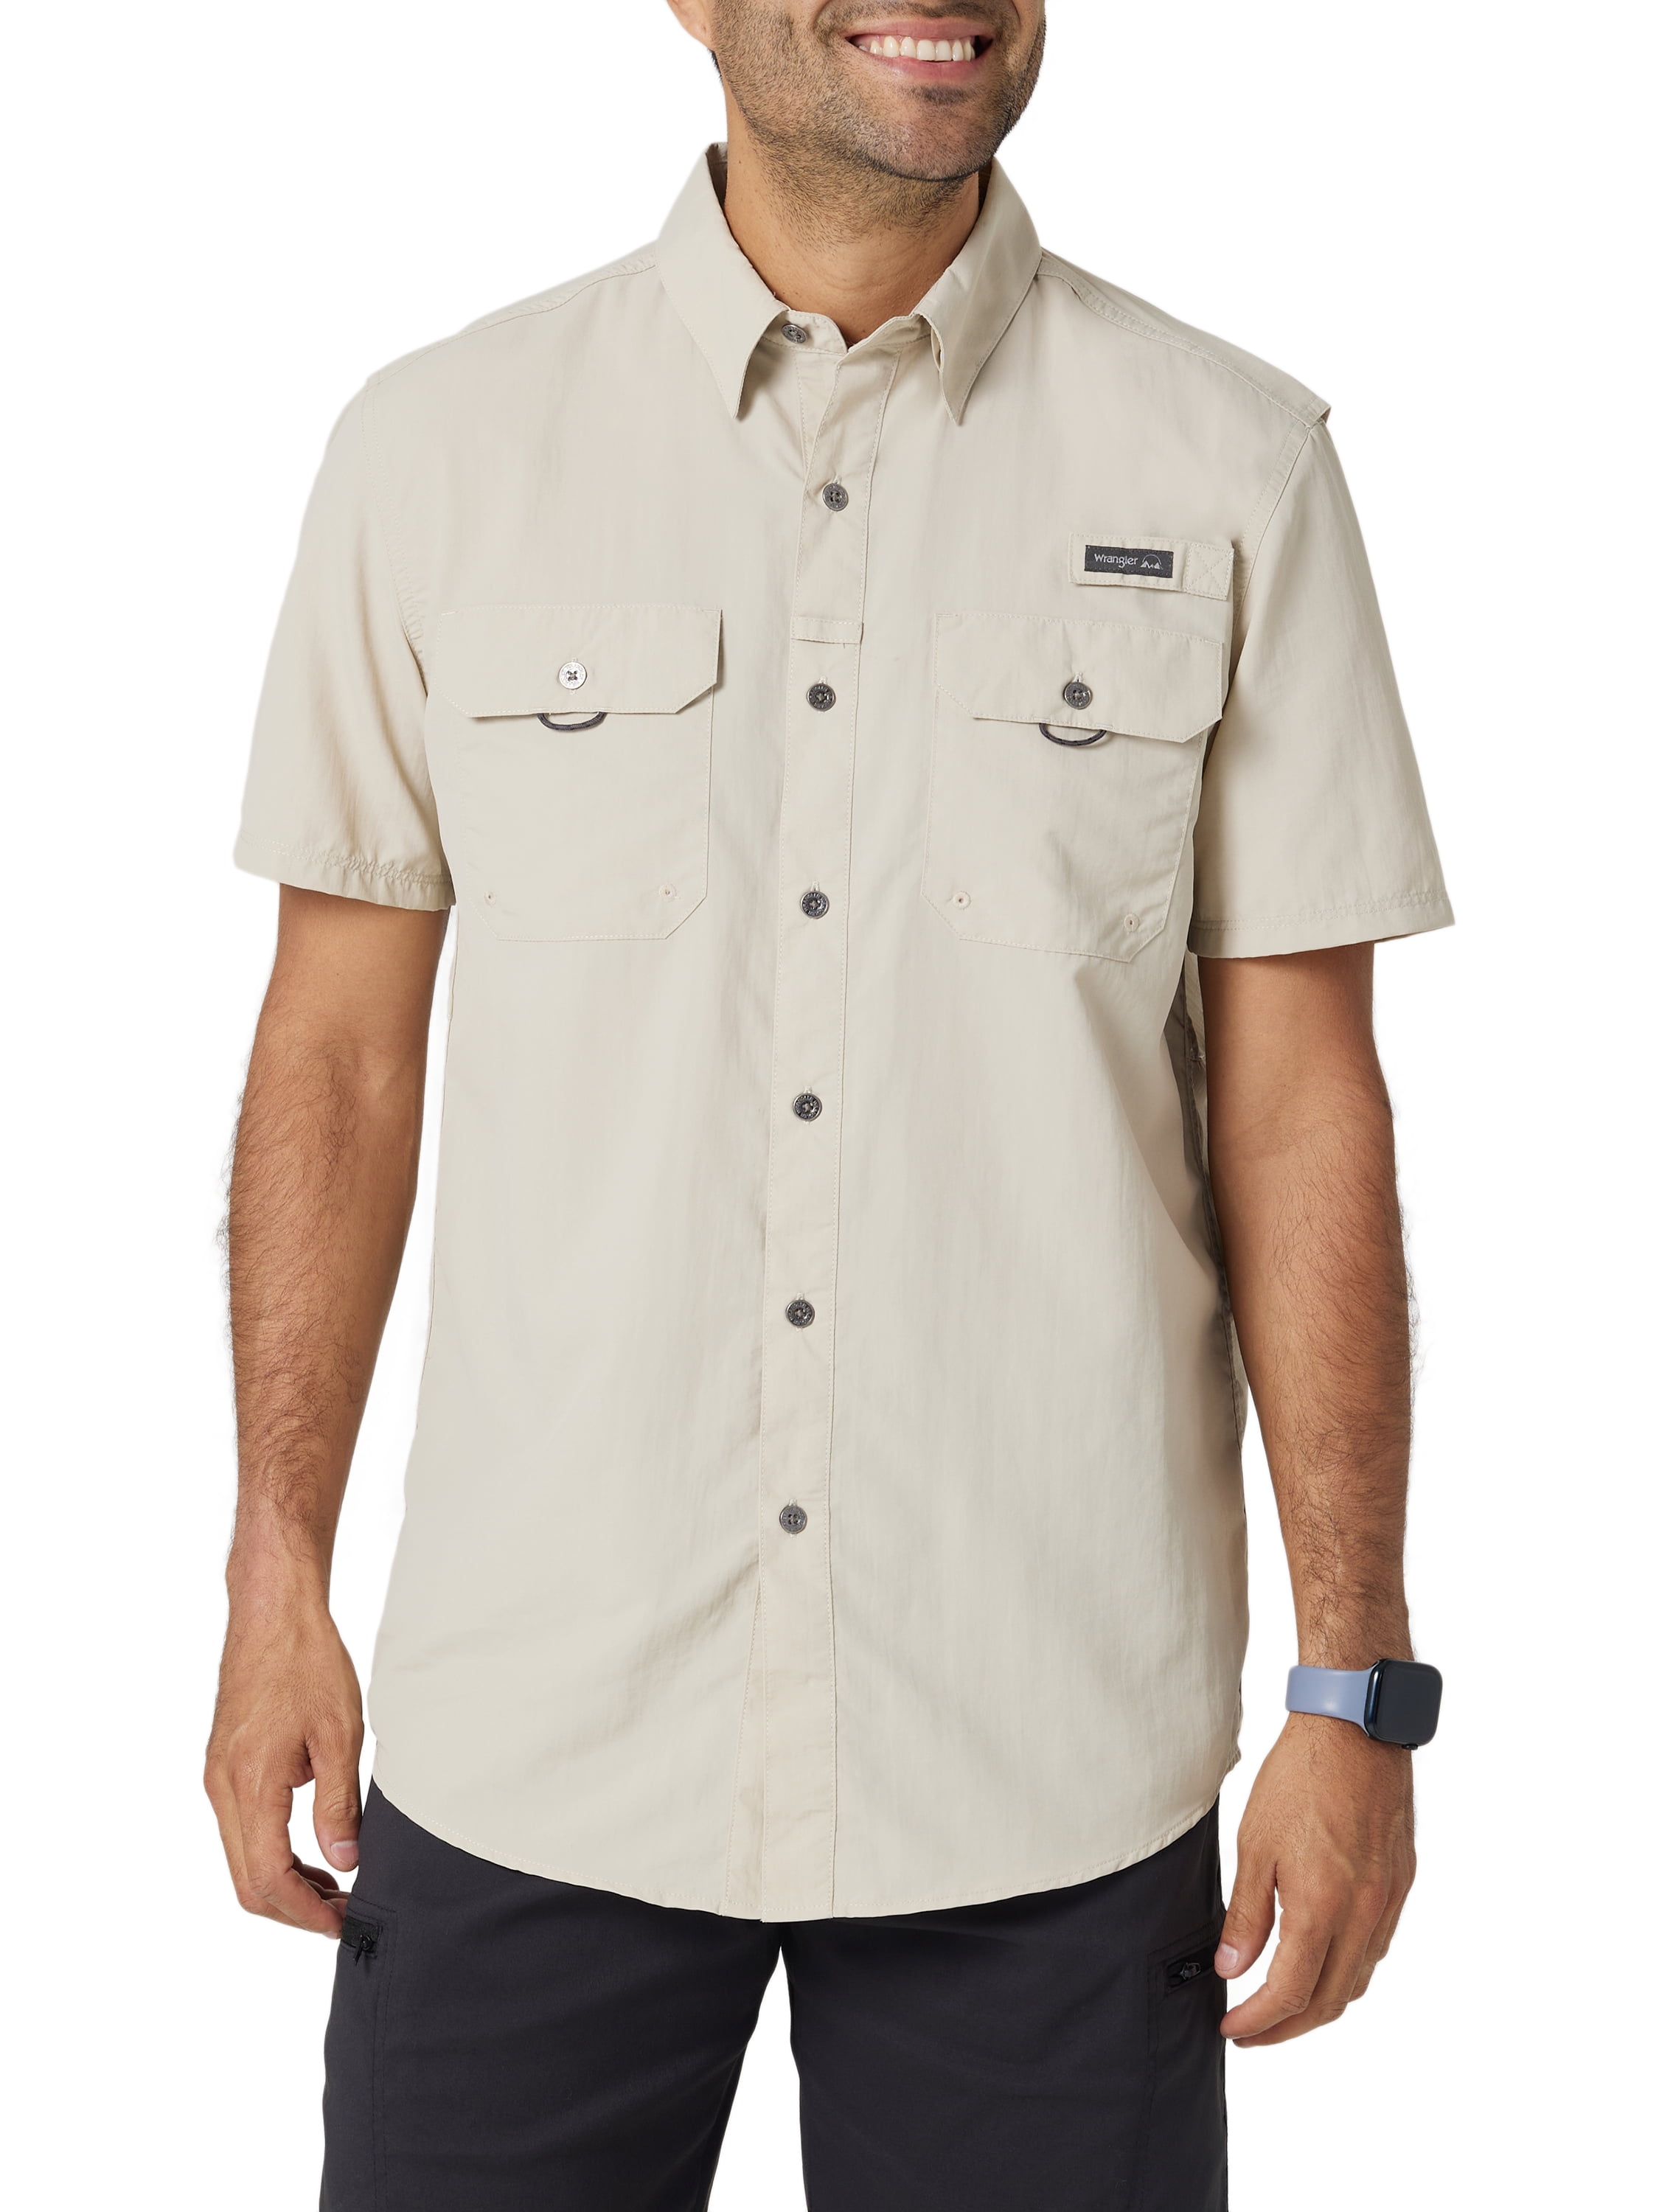 Wrangler Men's Outdoor Short Sleeve Fishing Shirt with UPF 40 Protection, Sizes S-5xl, Size: Small, Beige